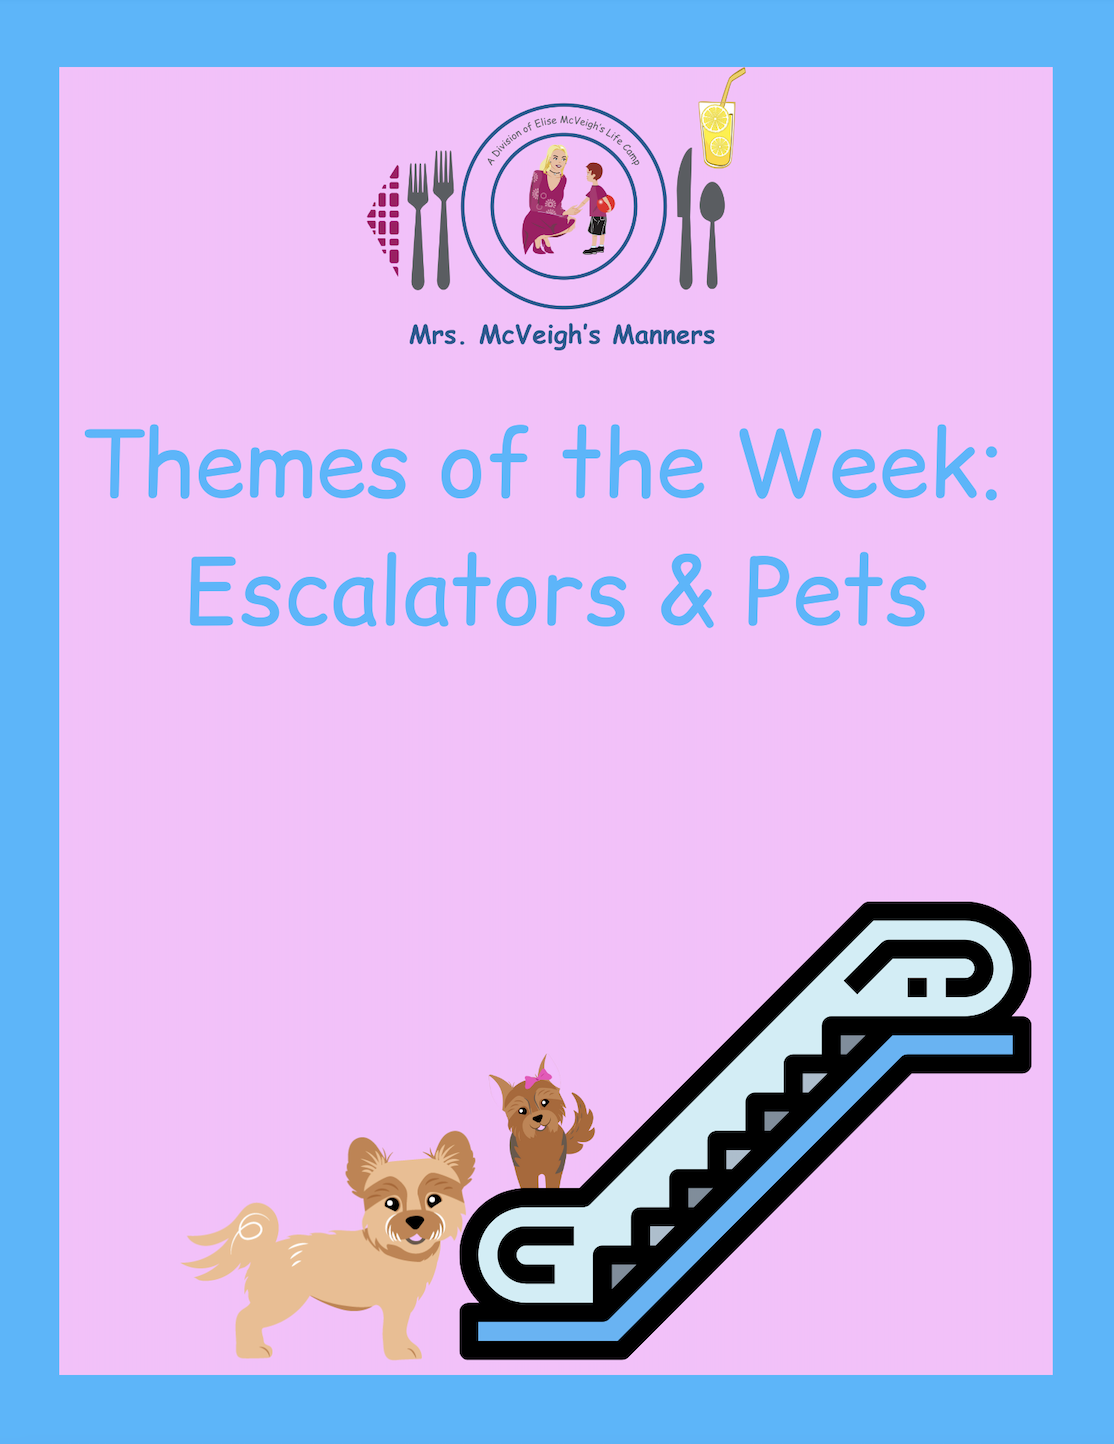 Mrs. McVeigh’s Manners Themes of the Week Escalators & Pets